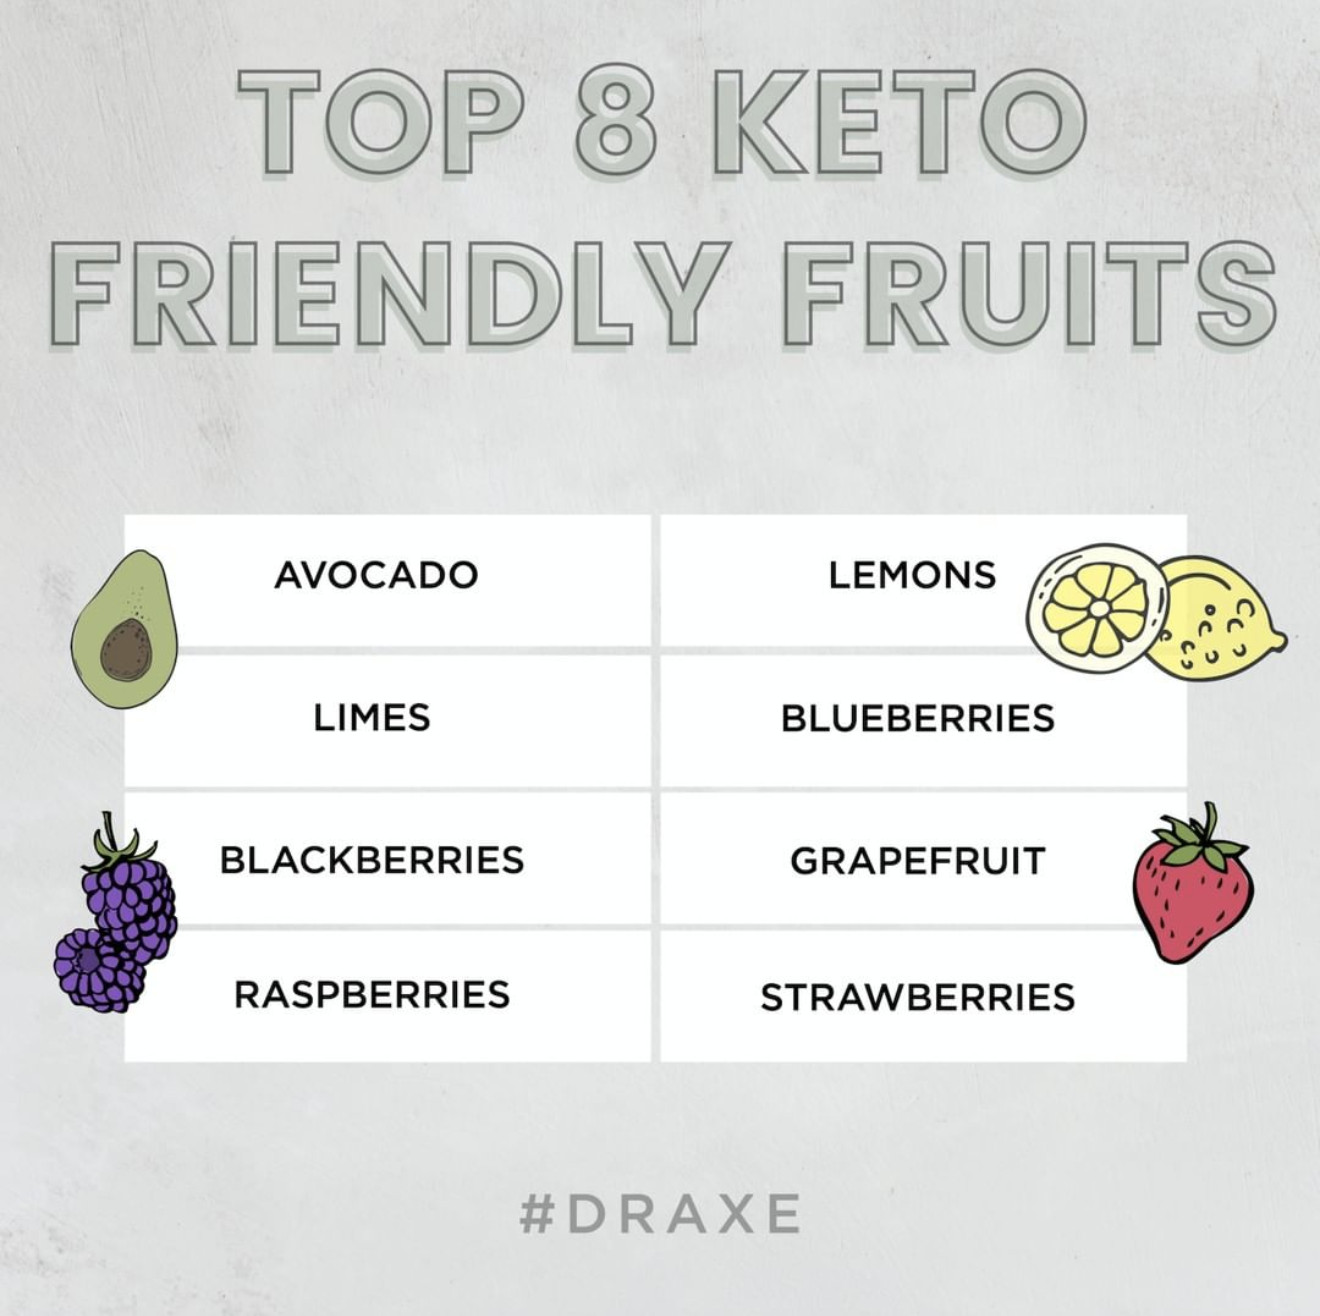 Josh Axe Keto Diet Recipes
 What Are the Best Keto Fruits in 2020